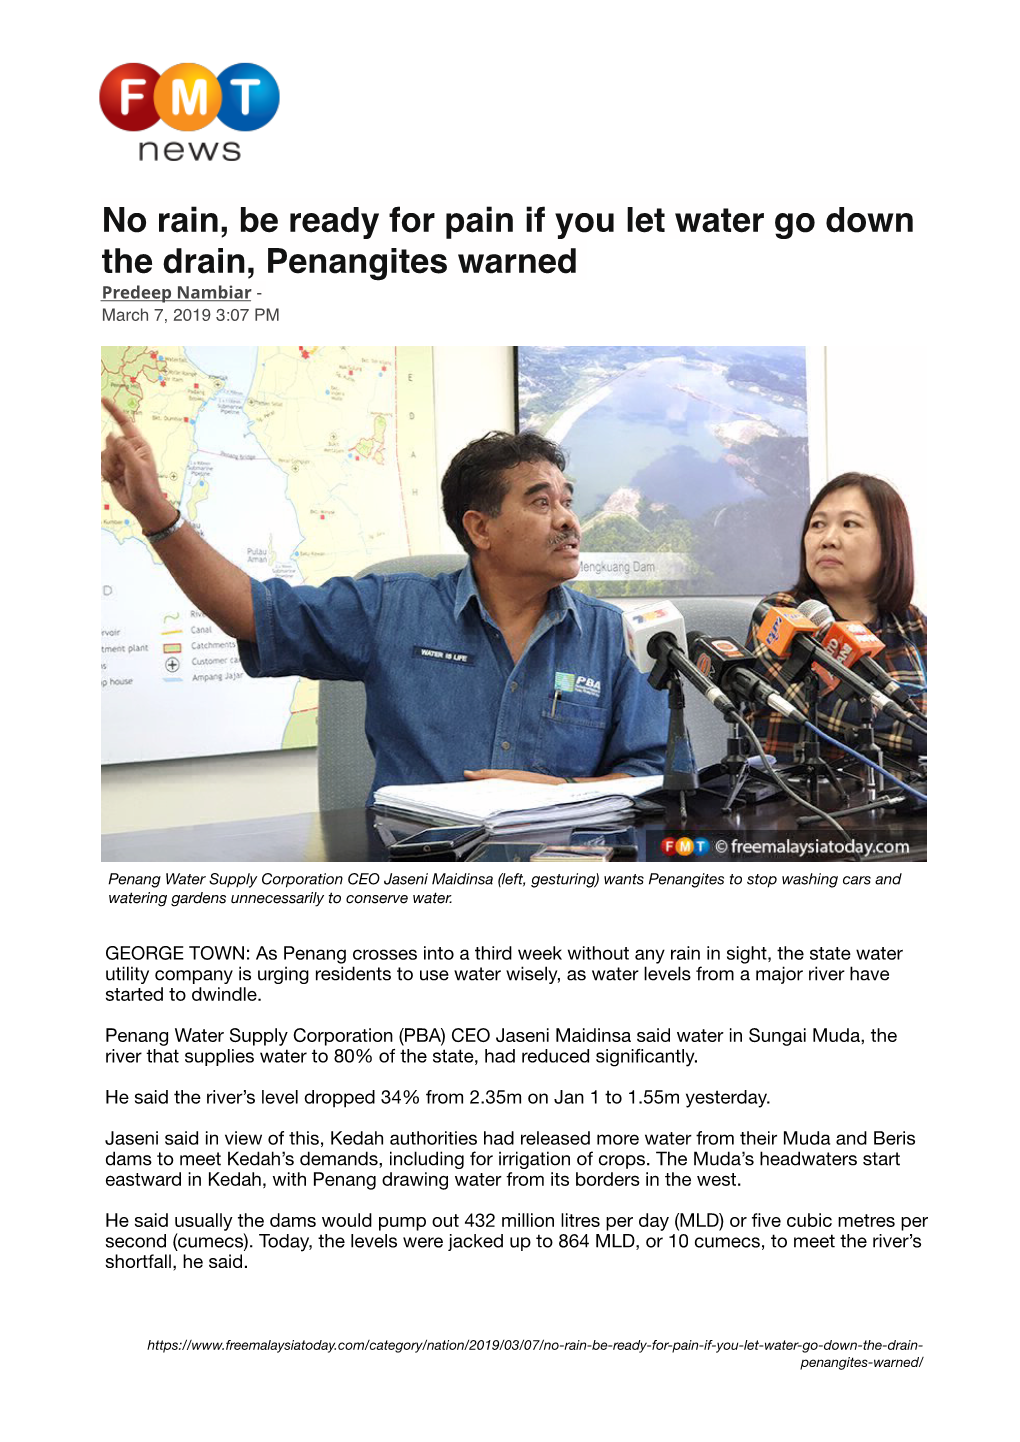 No Rain, Be Ready for Pain If You Let Water Go Down the Drain, Penangites Warned Predeep Nambiar - March 7, 2019 3:07 PM